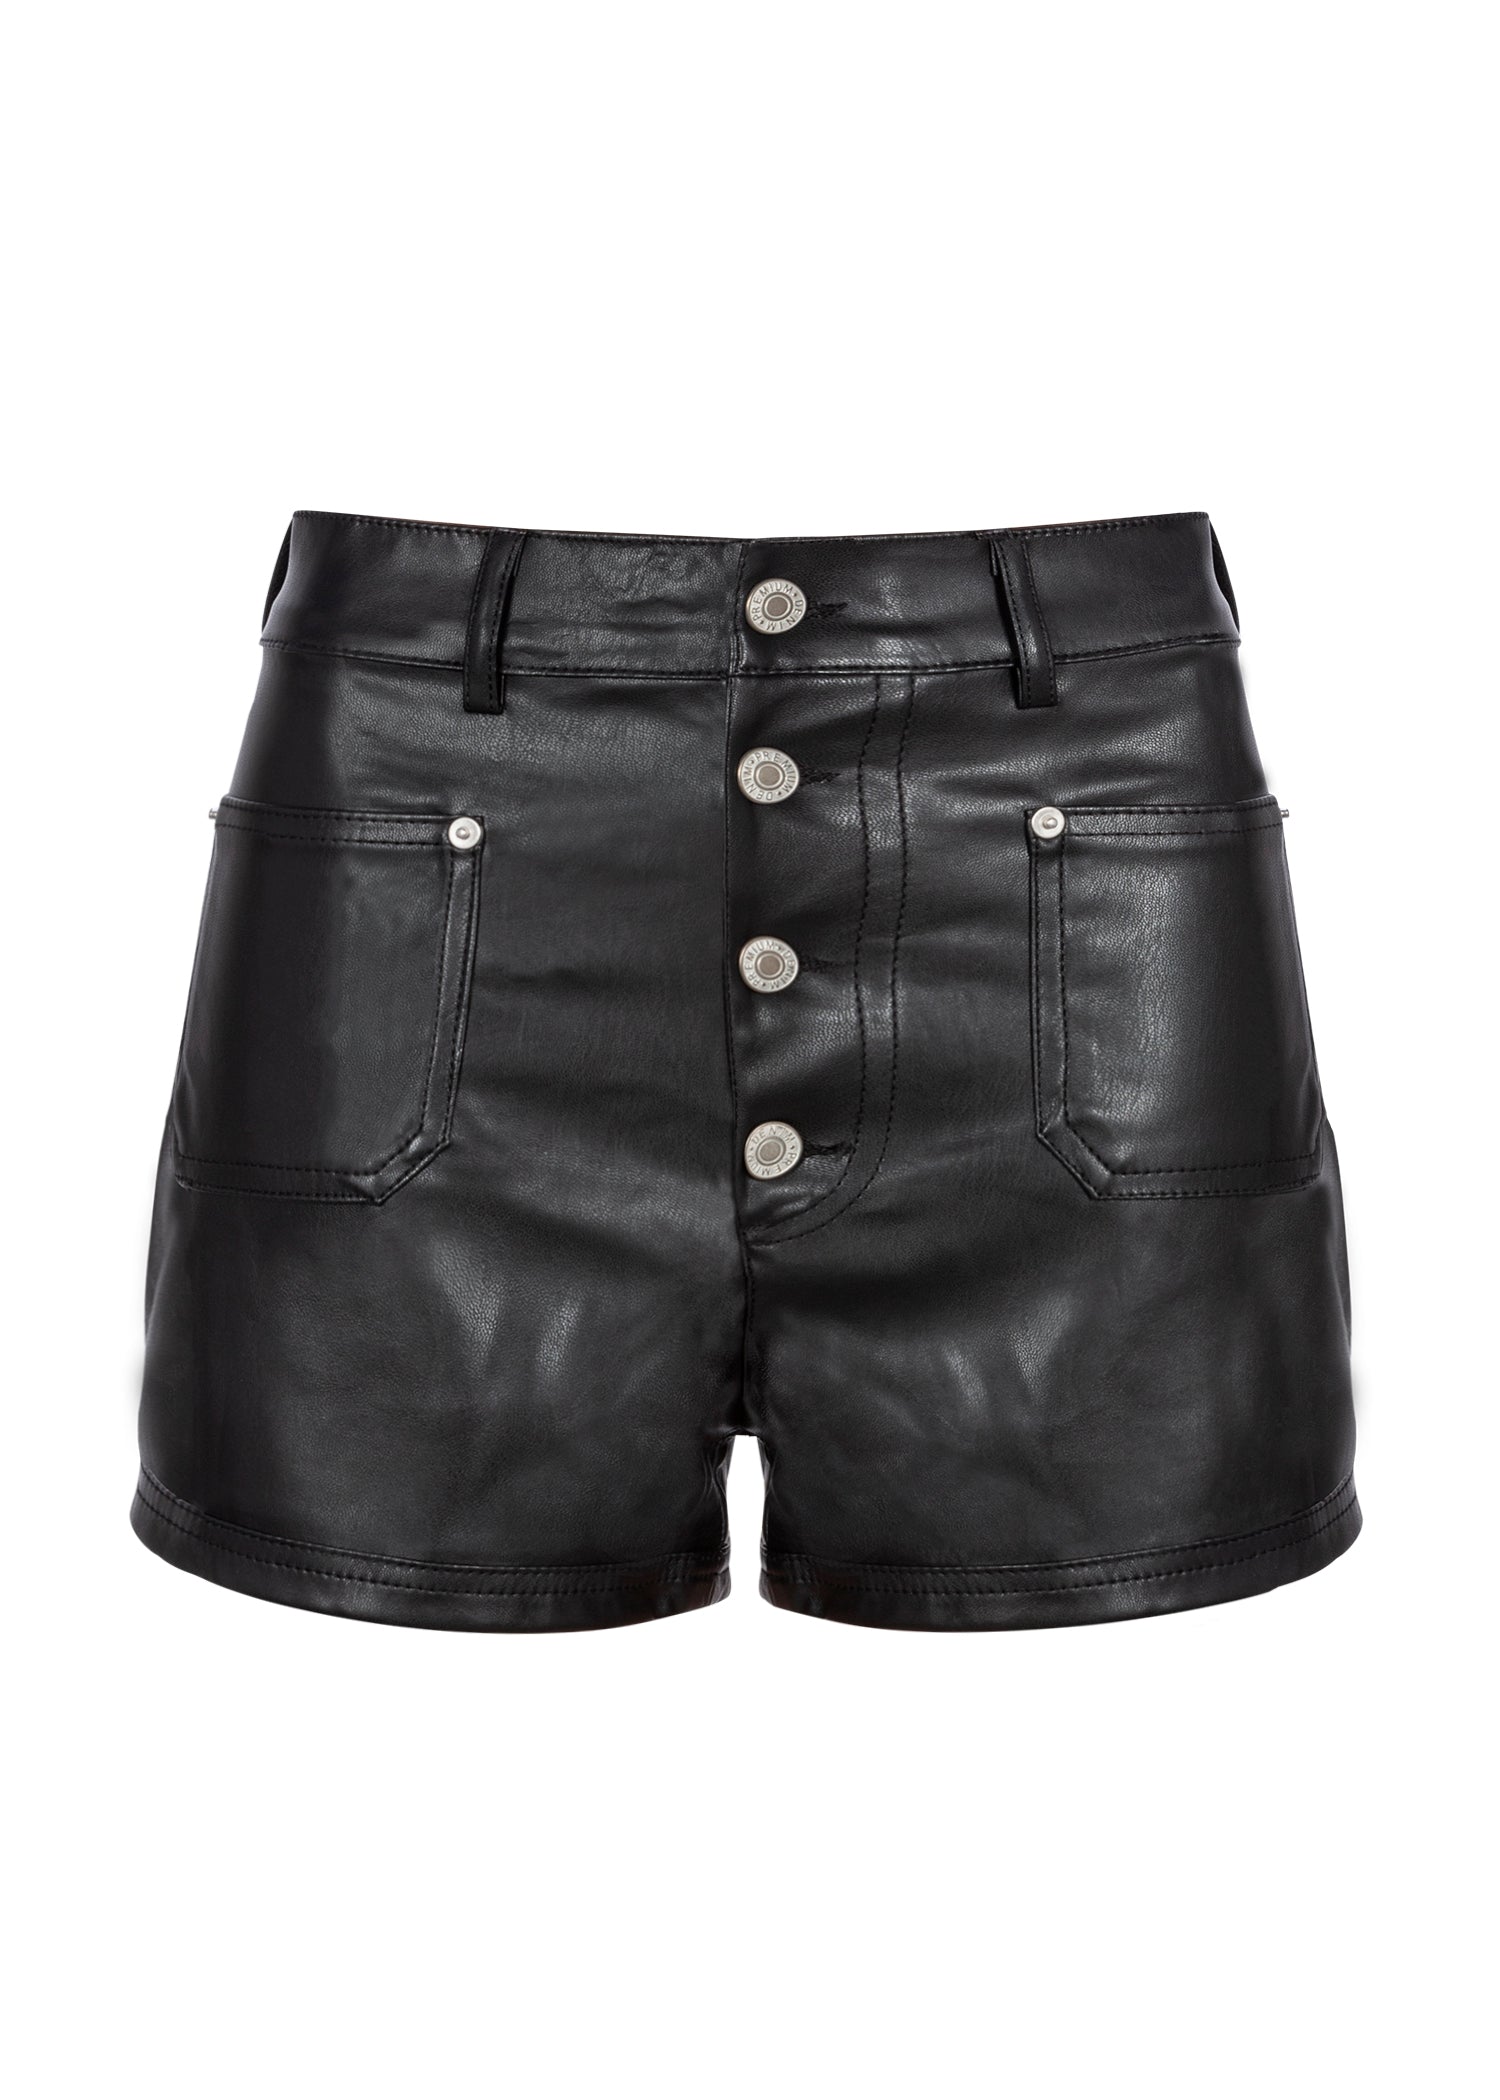 Black Faux Leather High Waist Short | Leather Short | Leather Hot Pant ...